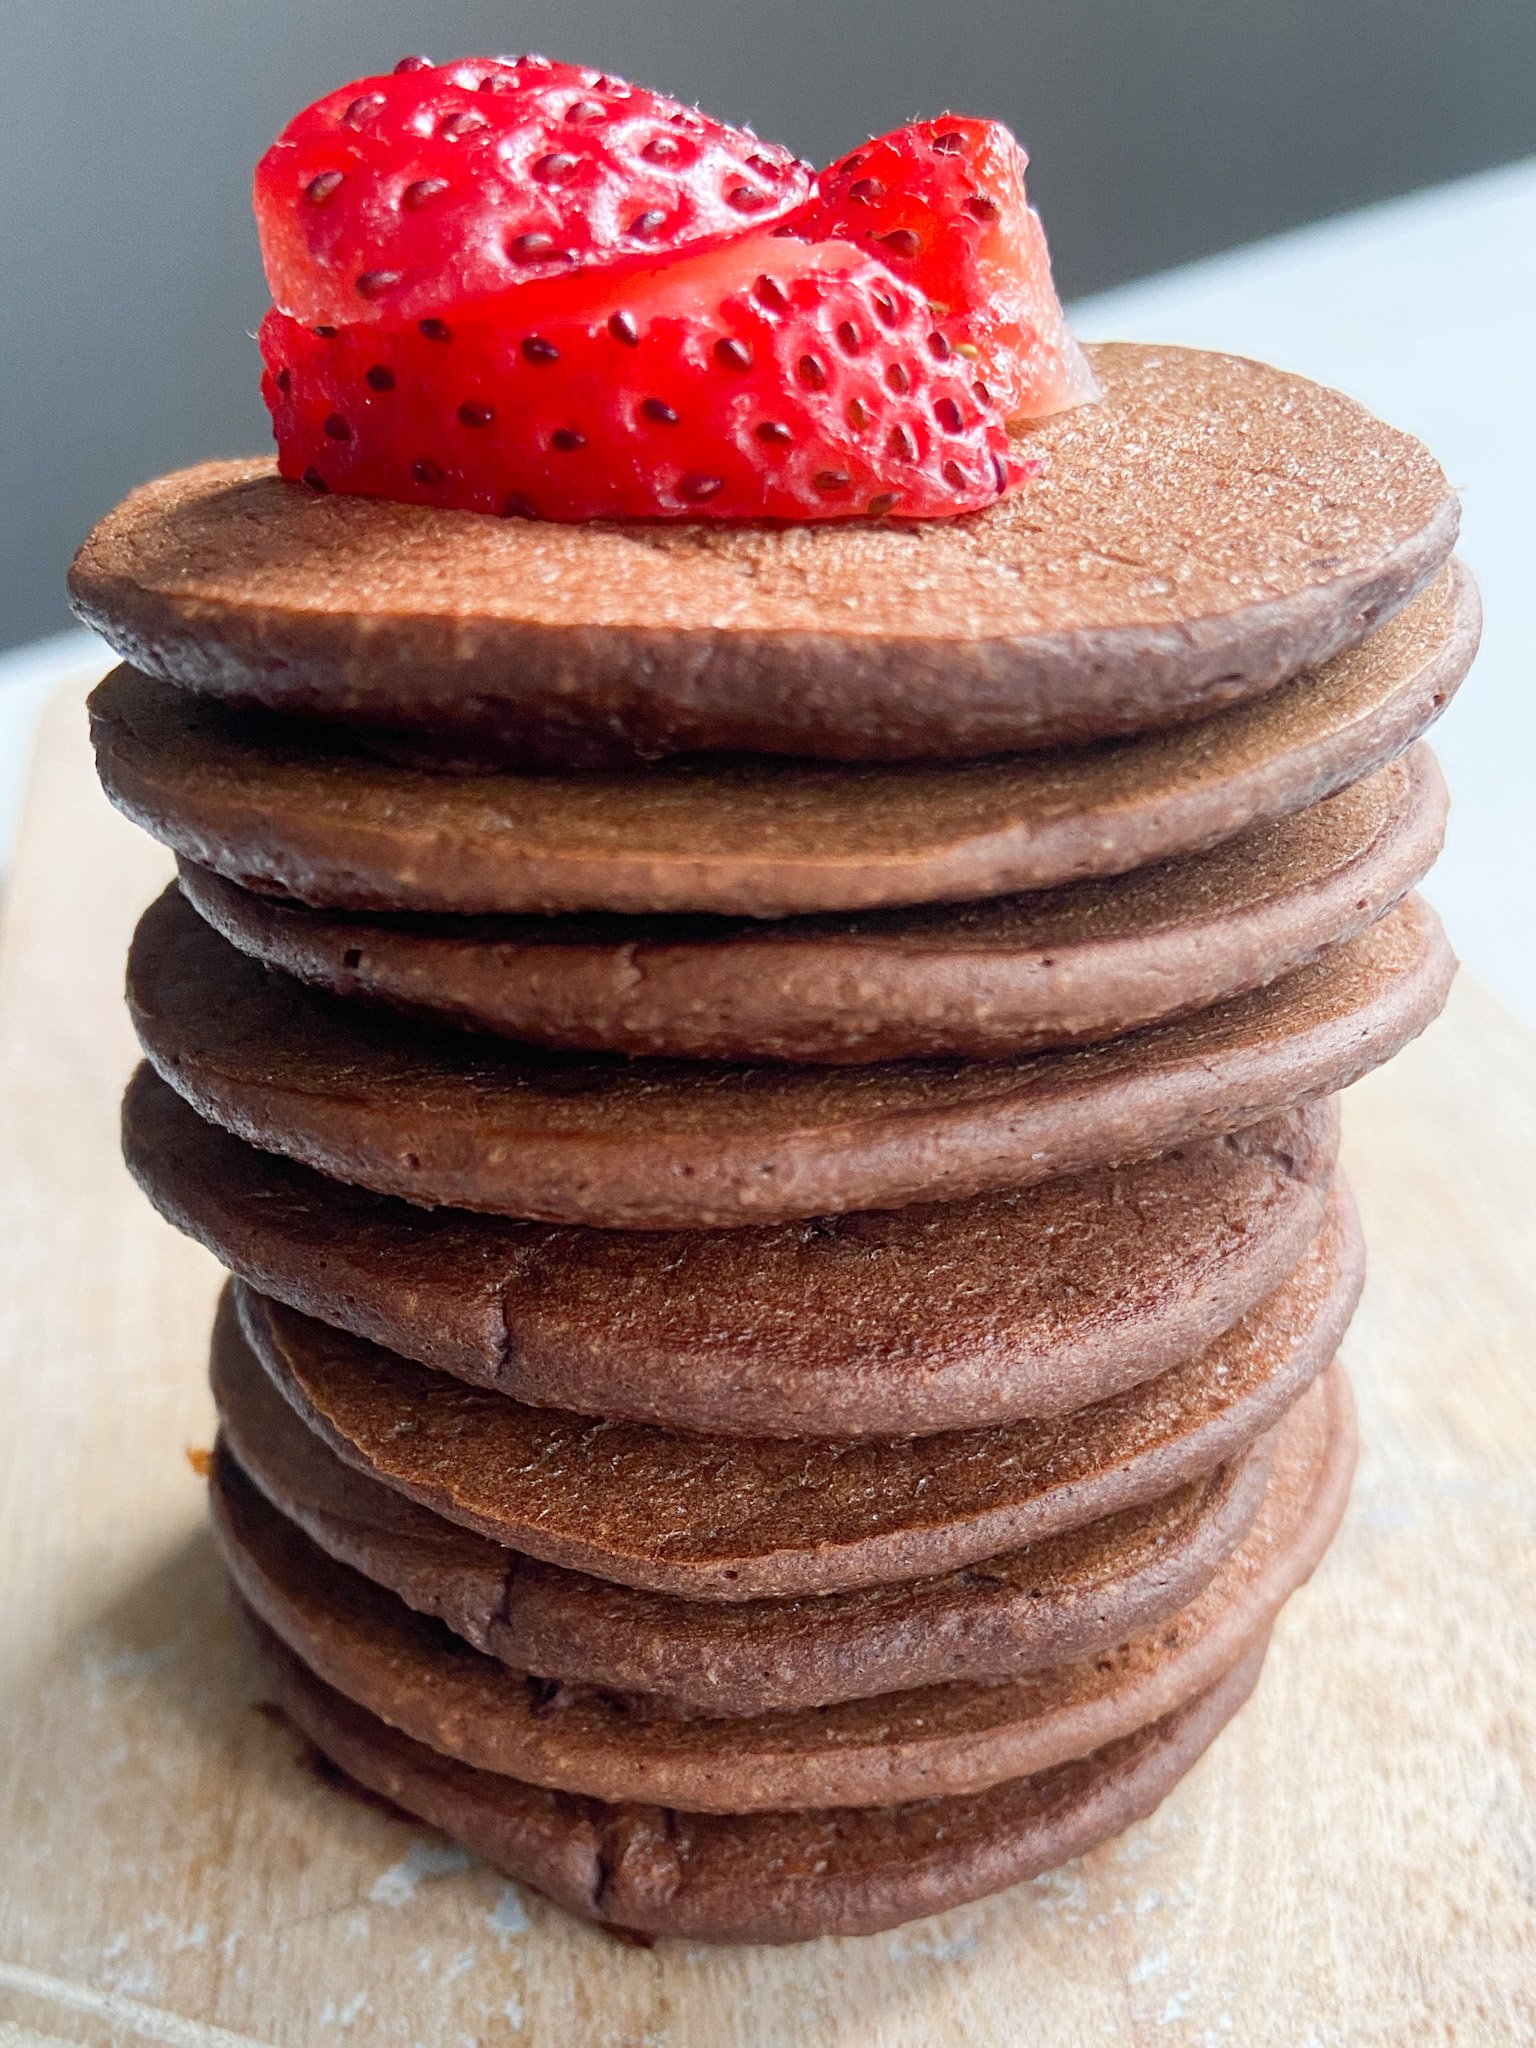 Chocolate banana pancakes topped with sliced strawberries